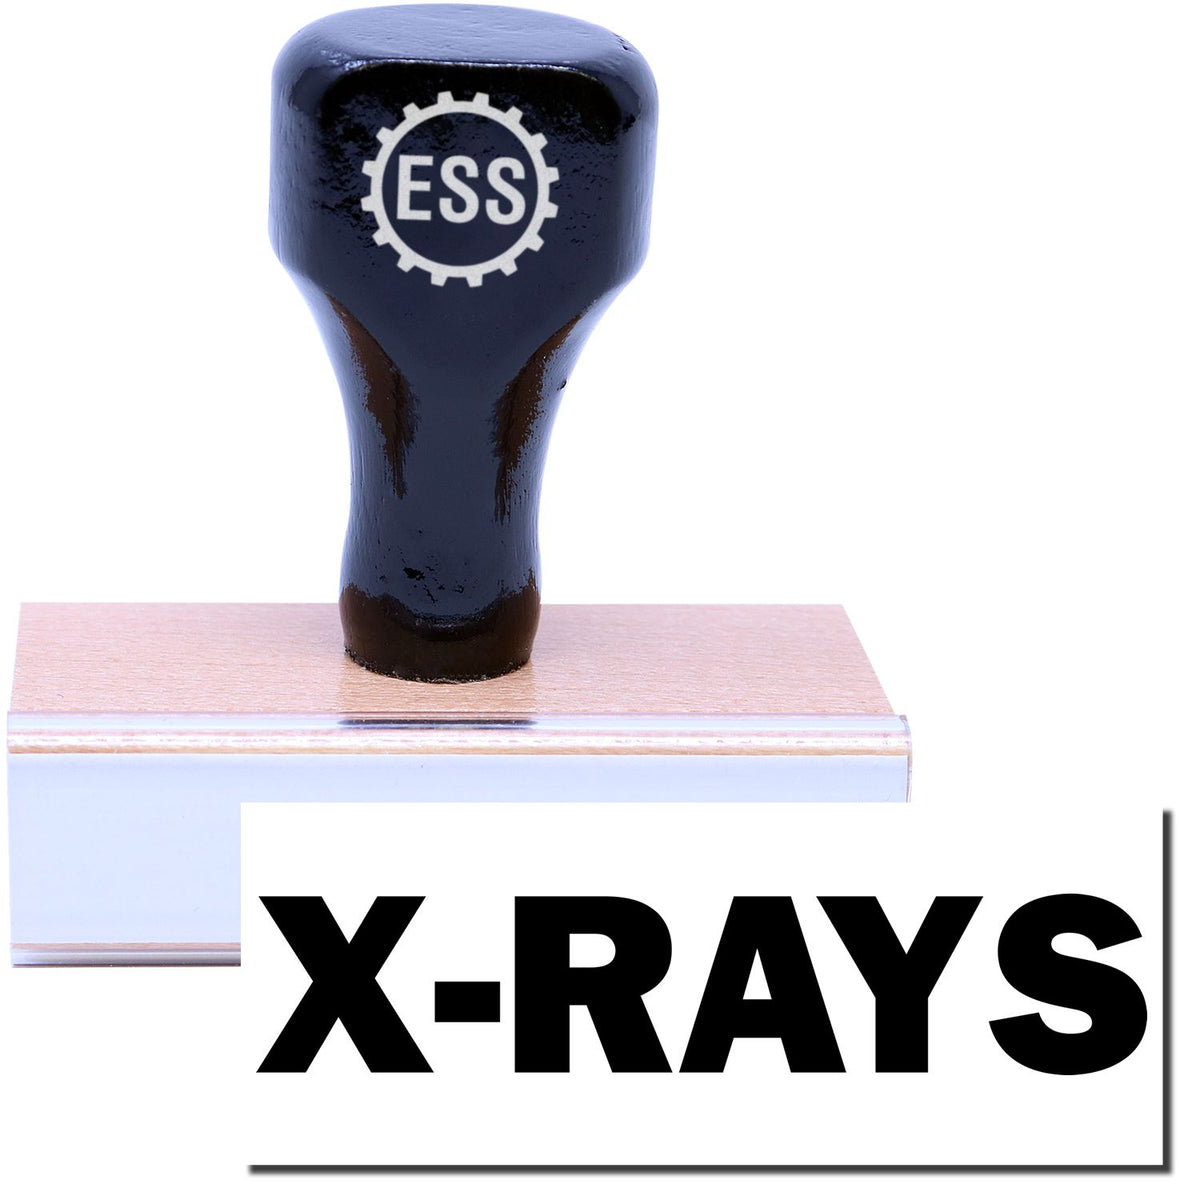 A stock office rubber stamp with a stamped image showing how the text &quot;X-RAYS&quot; is displayed after stamping.